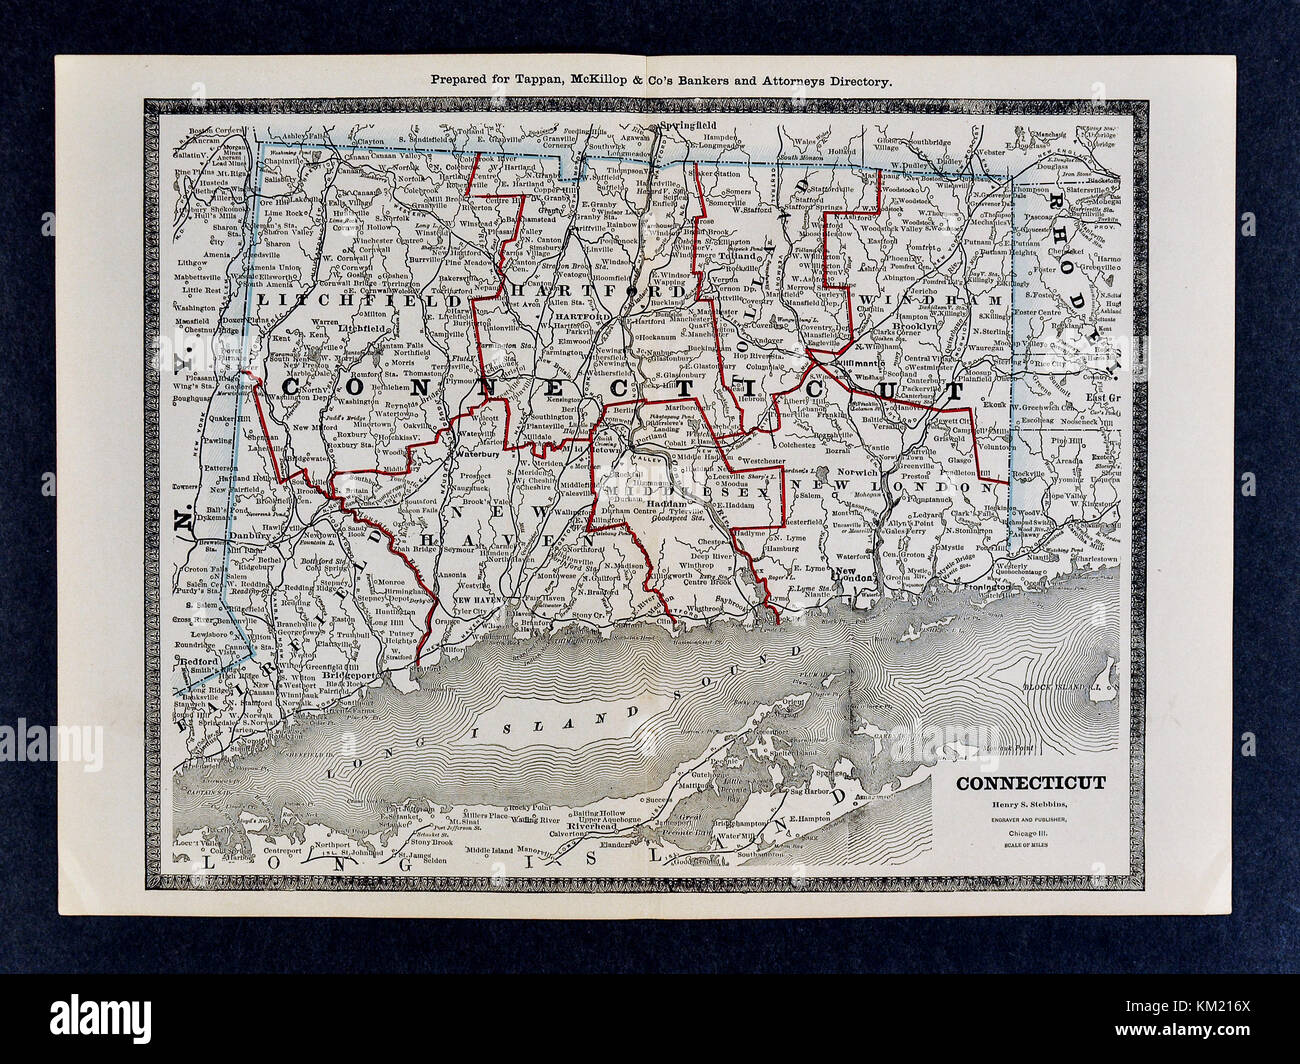 George Cram Antique Map from 1866 Atlas for Attorneys and Bankers: United States - Connecticut - Hartford New Haven Stock Photo